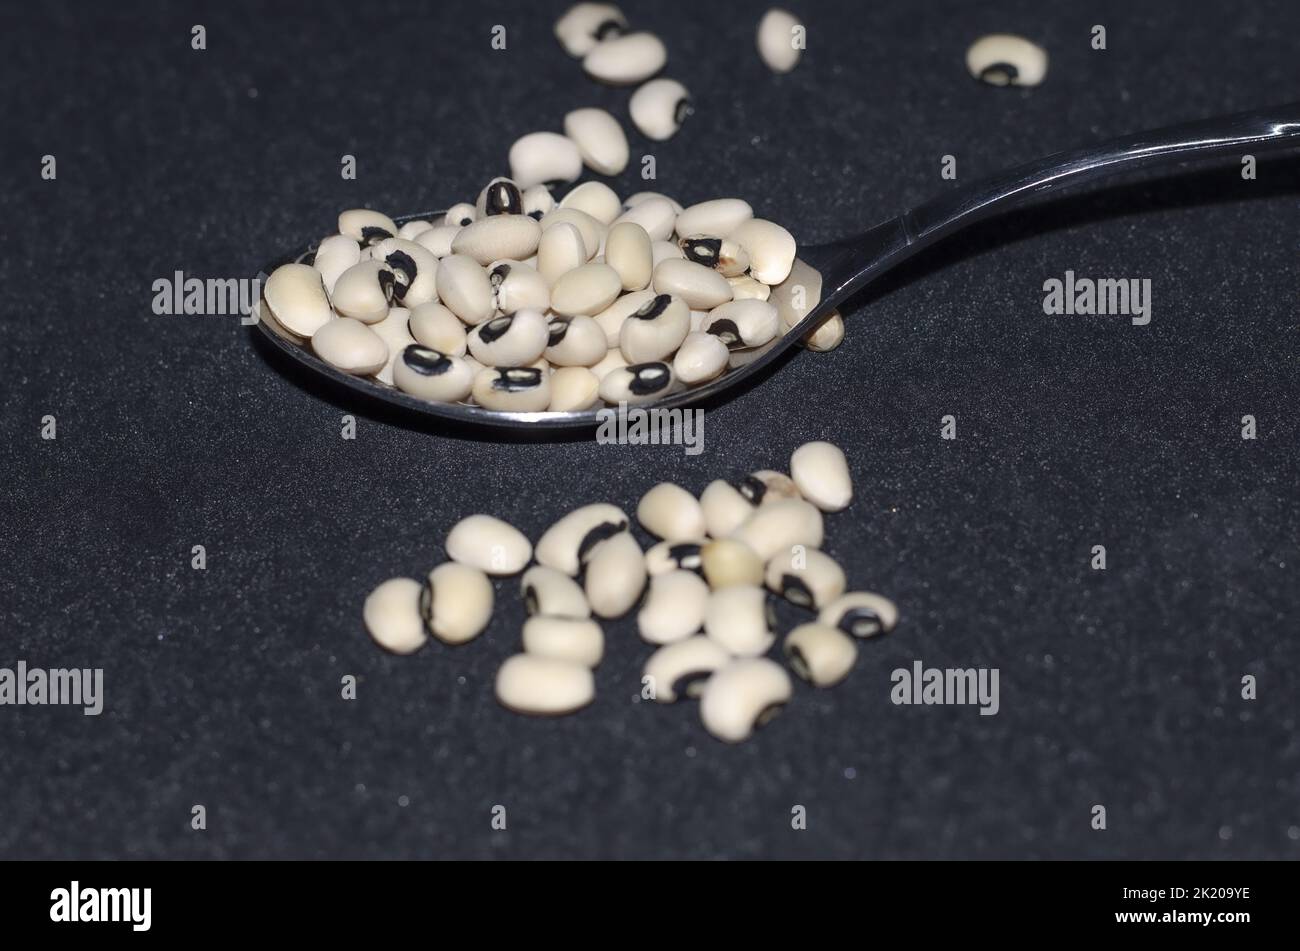 Dried black eyed bean in a tablespoon spilled on black background. Selective focus,  dried kidney beans on a black background Stock Photo